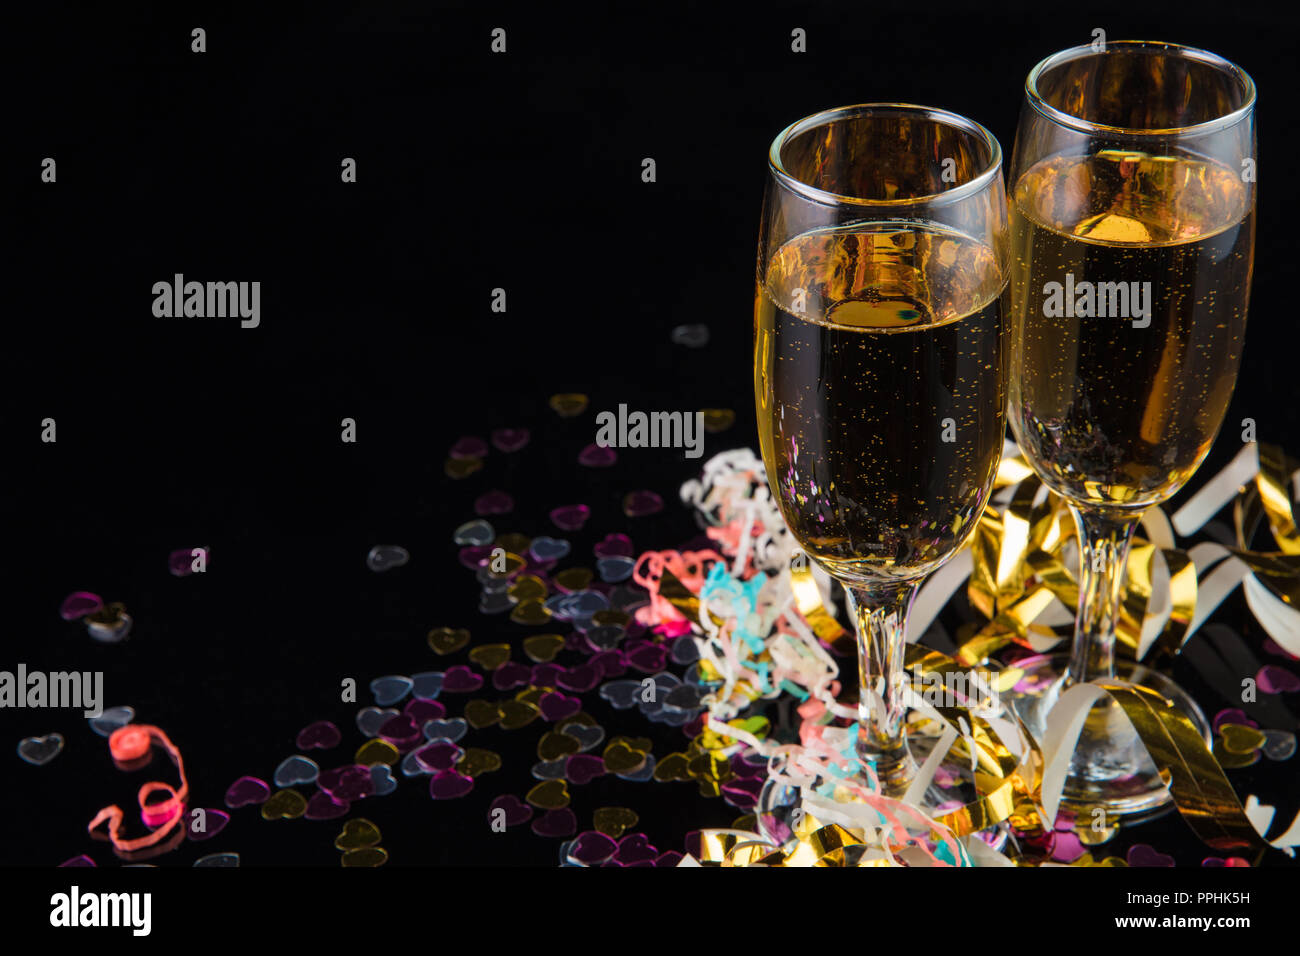 two glasses of champagne on a shiny black surface with confetti against a black background. Stock Photo